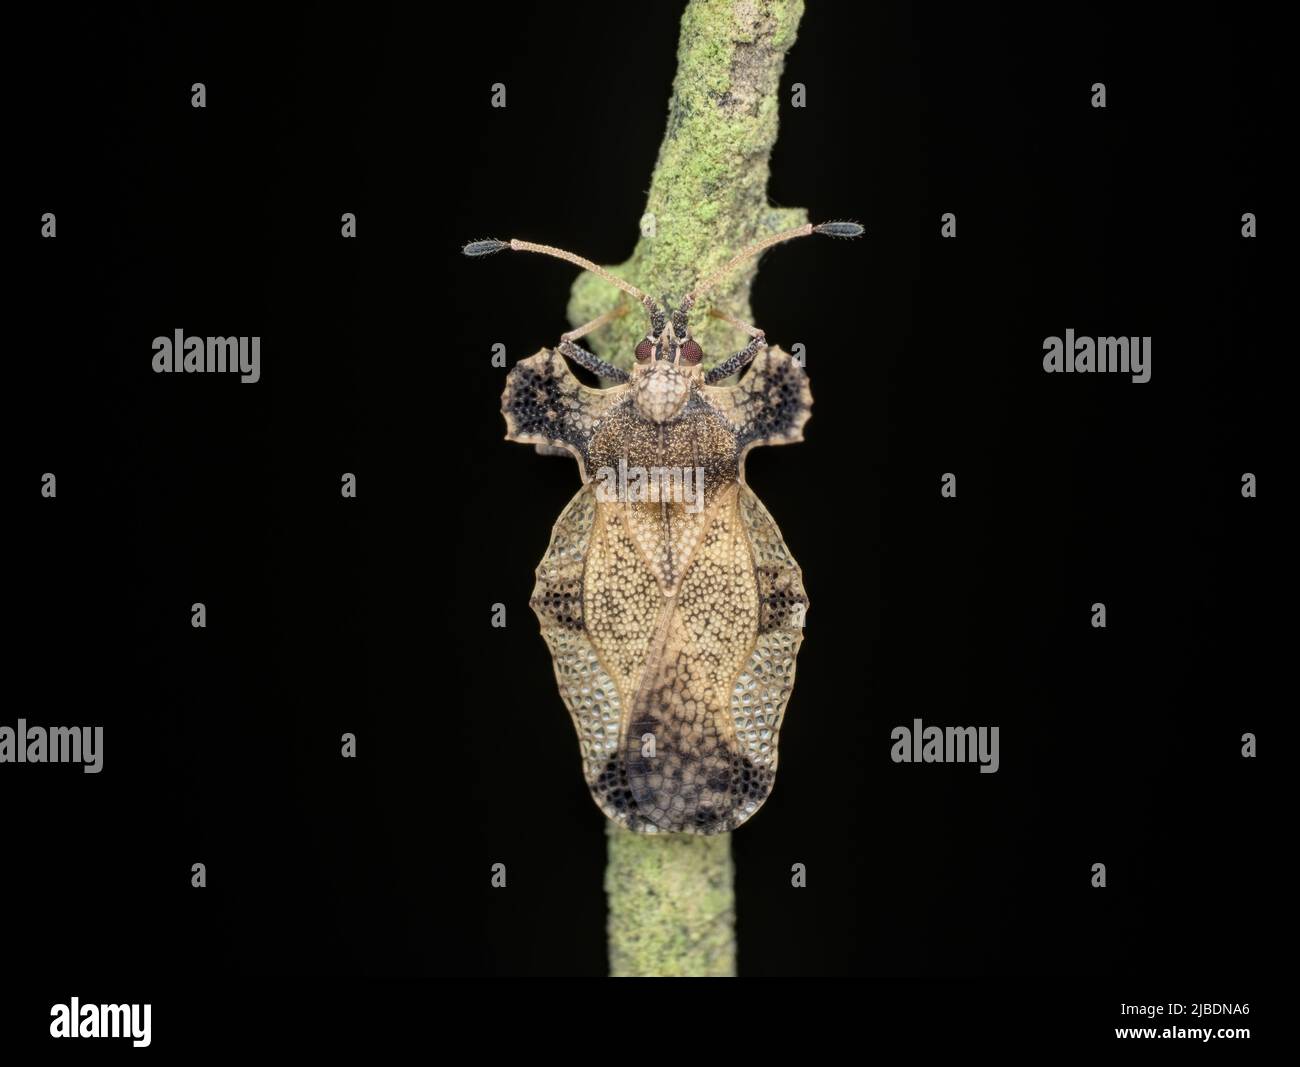 lace bugs perched on the branch from top view Stock Photo